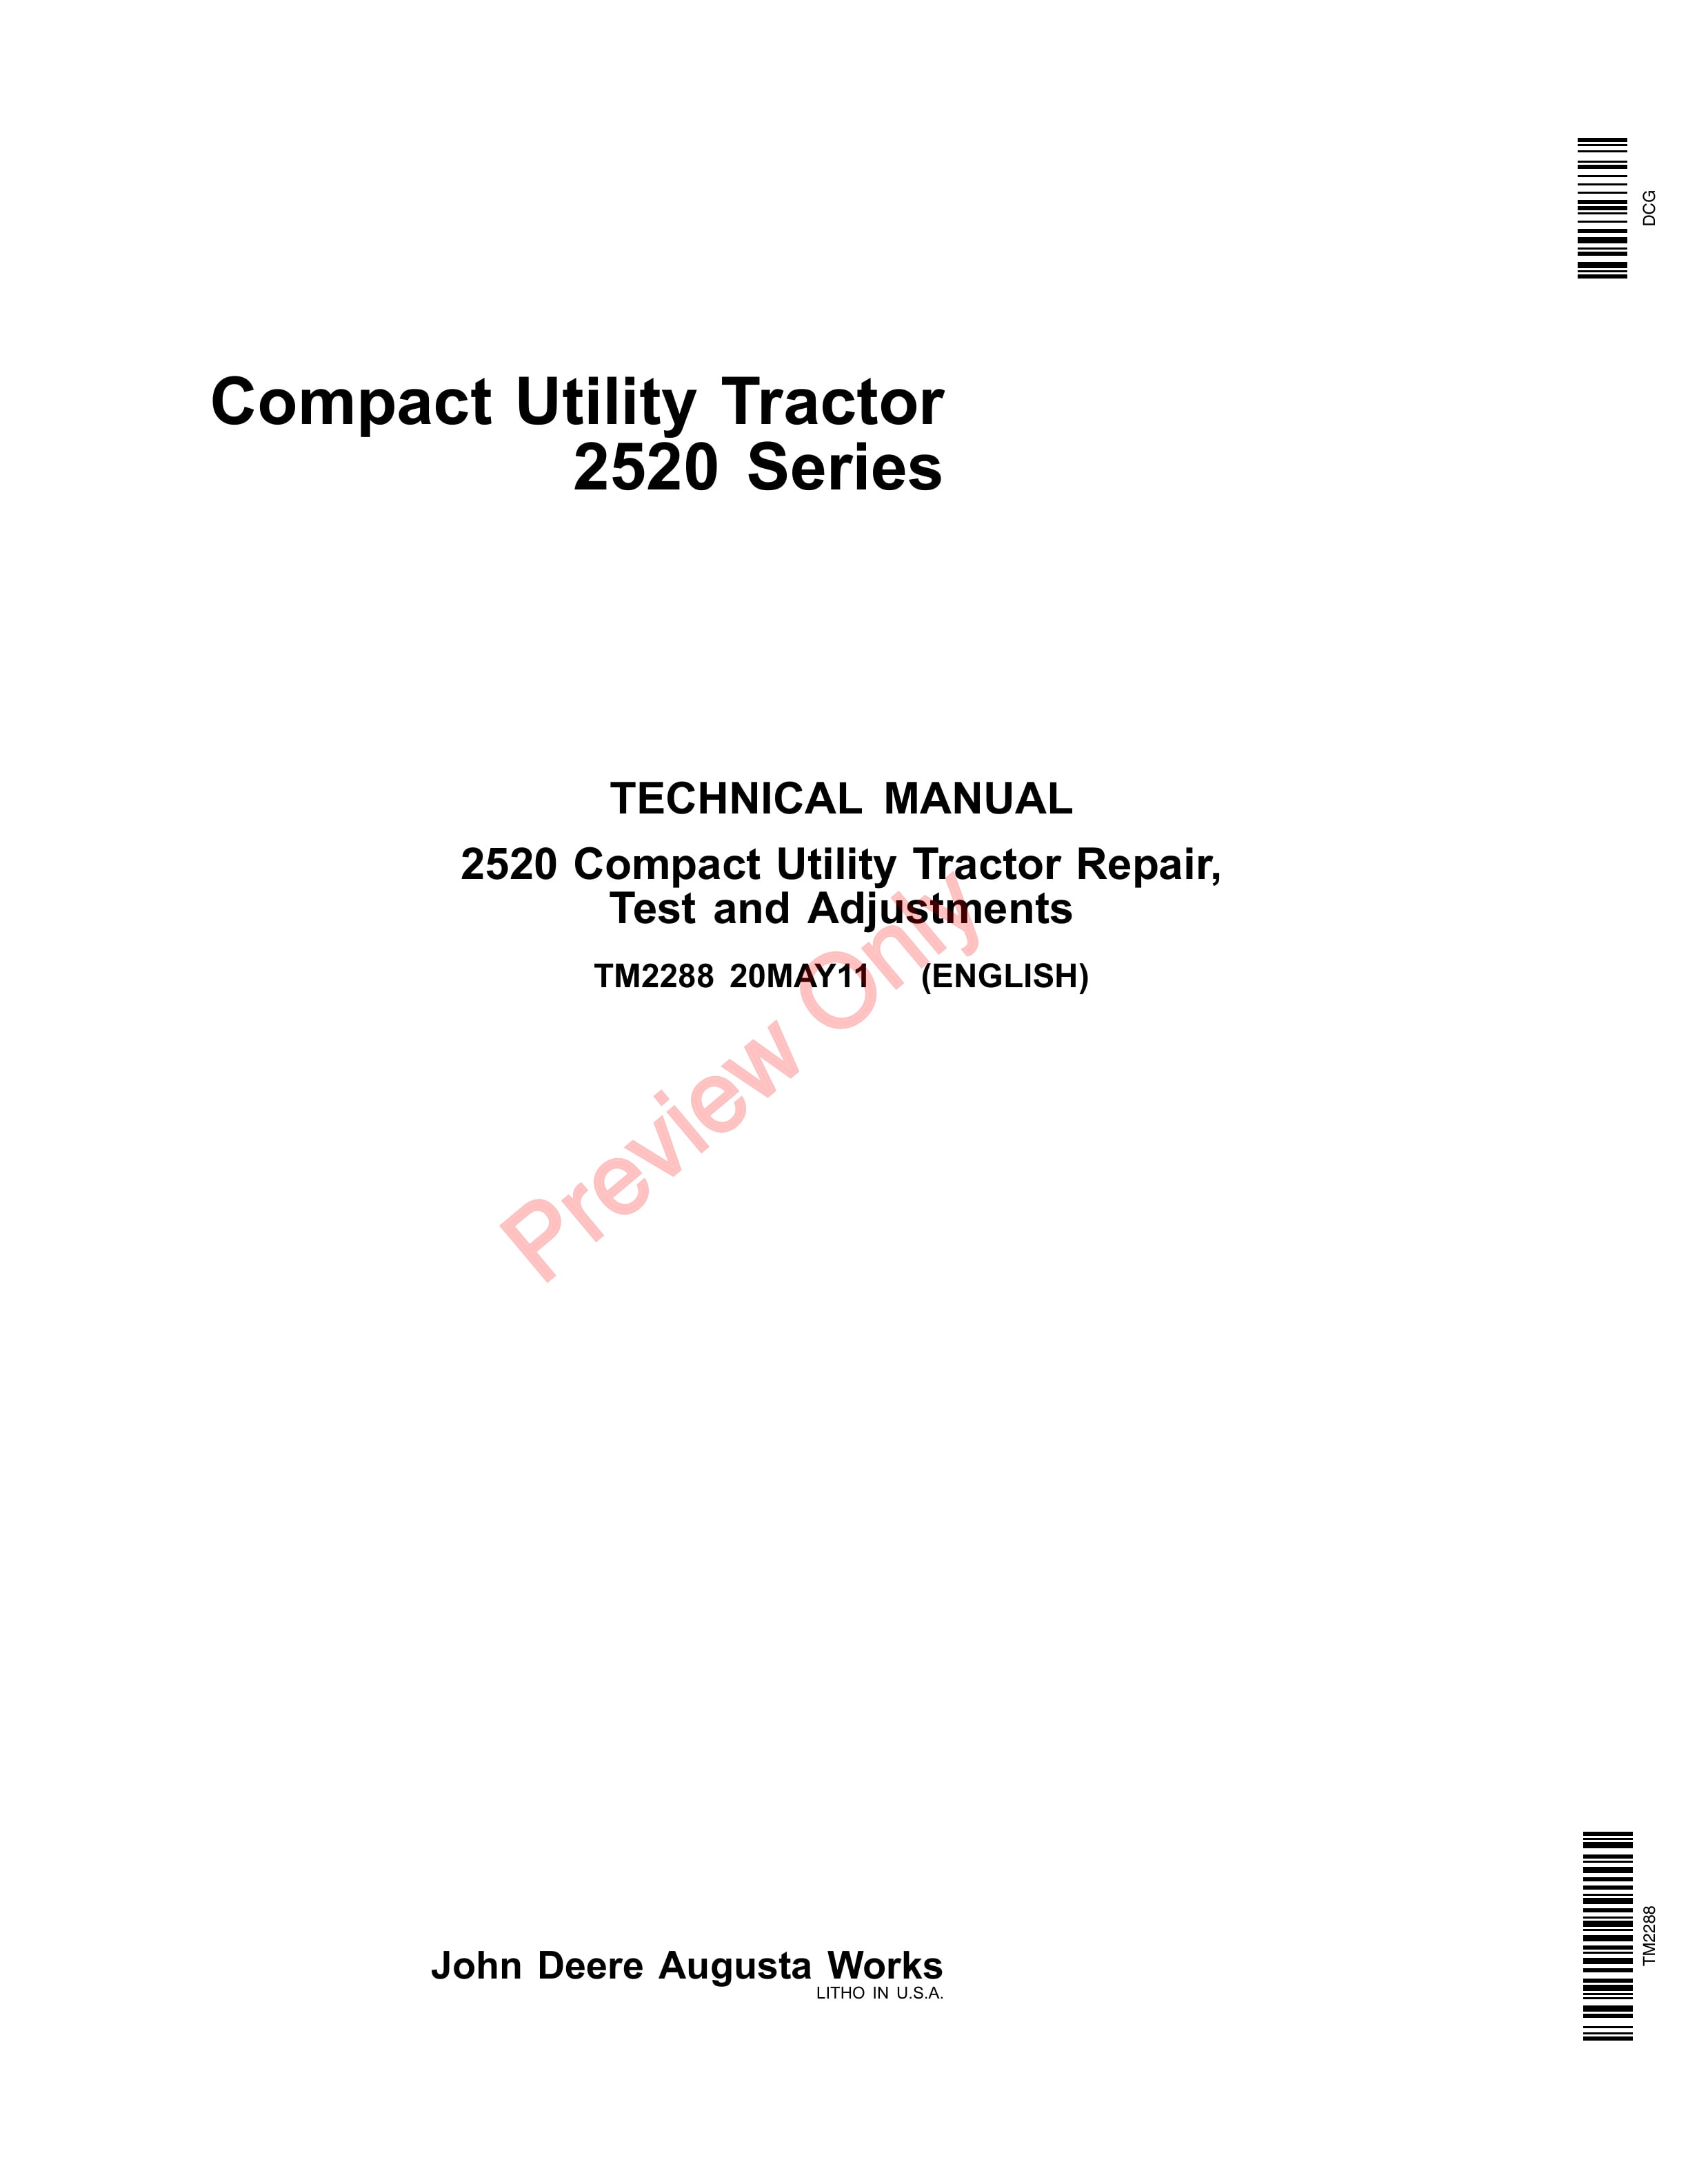 John Deere 2520 Compact Utility Tractor Technical Manual TM2288 20MAY11-1